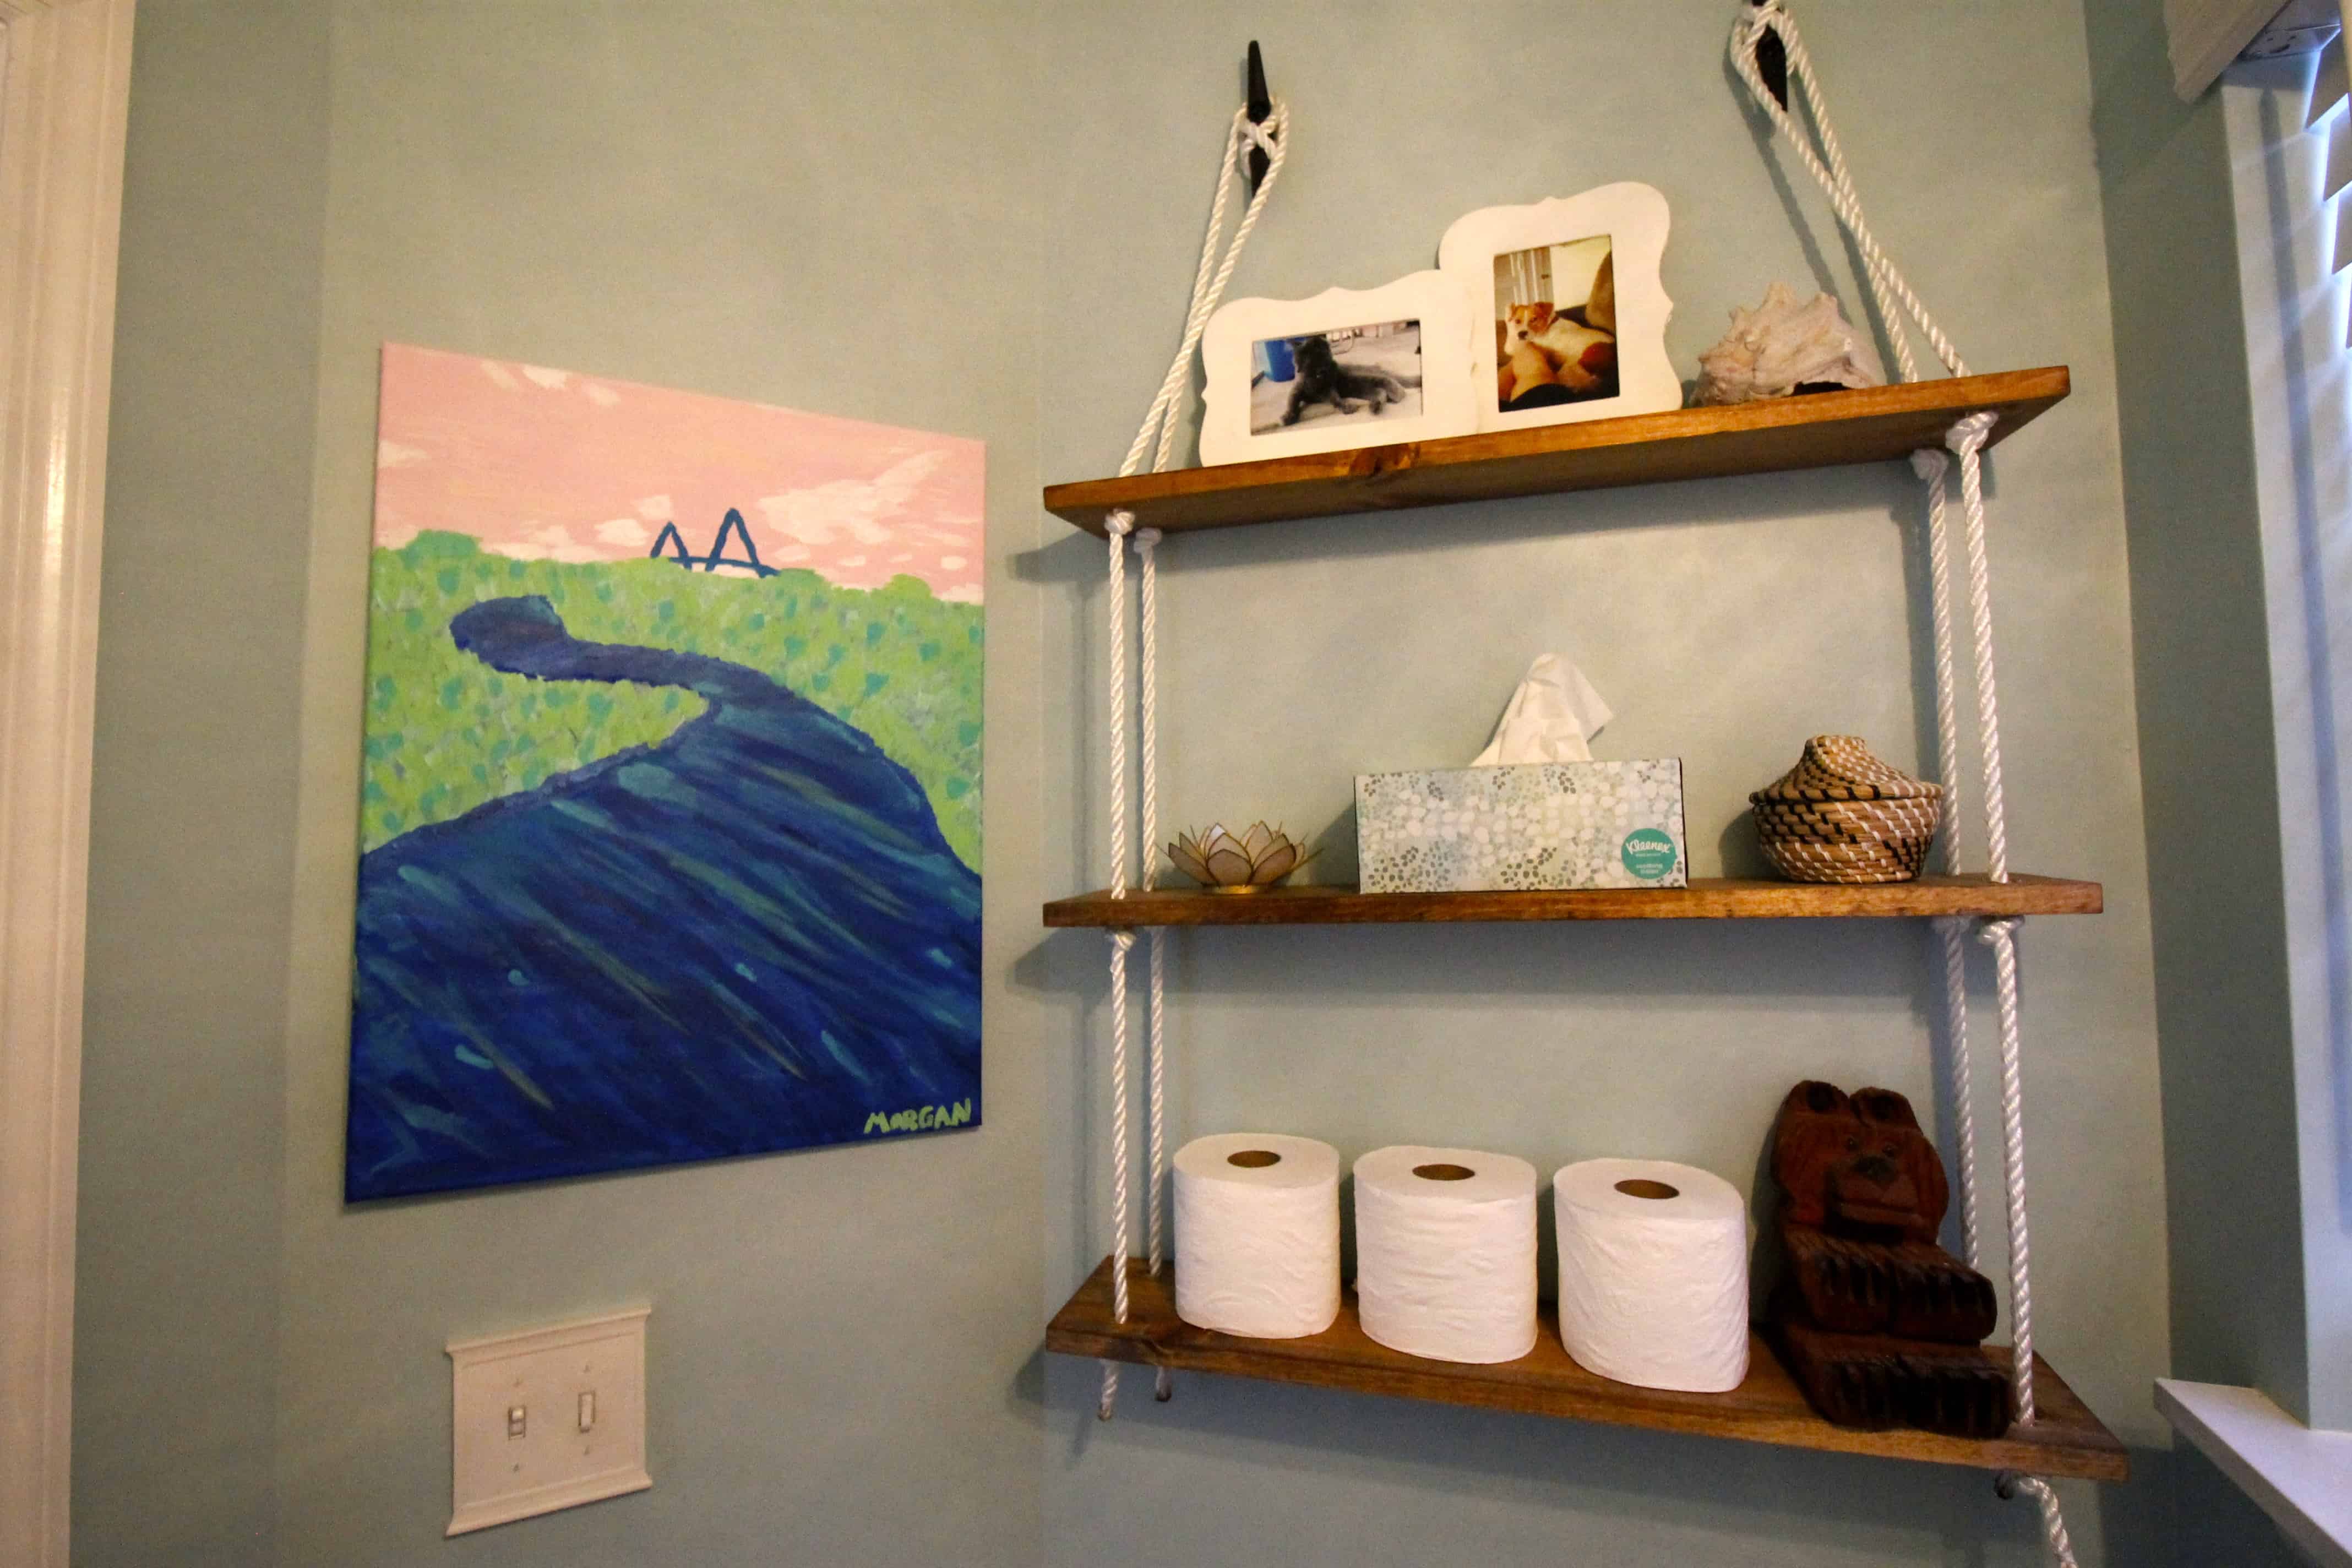 DIY Nautical Rope Shelving Tutorial for the $100 Room Challenge